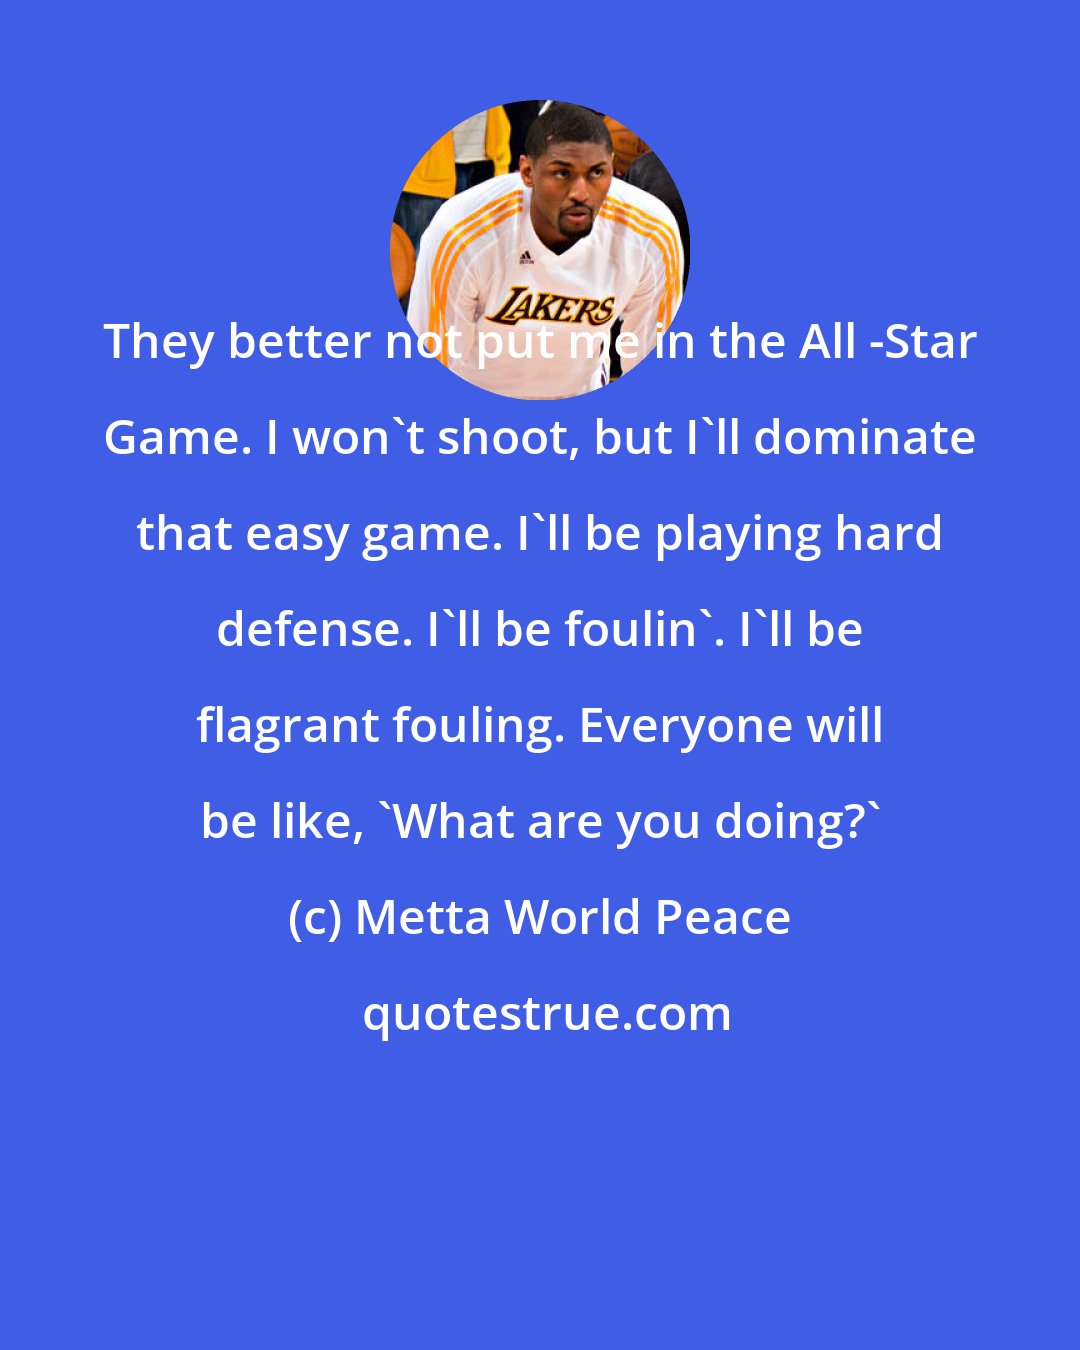 Metta World Peace: They better not put me in the All -Star Game. I won't shoot, but I'll dominate that easy game. I'll be playing hard defense. I'll be foulin'. I'll be flagrant fouling. Everyone will be like, 'What are you doing?'